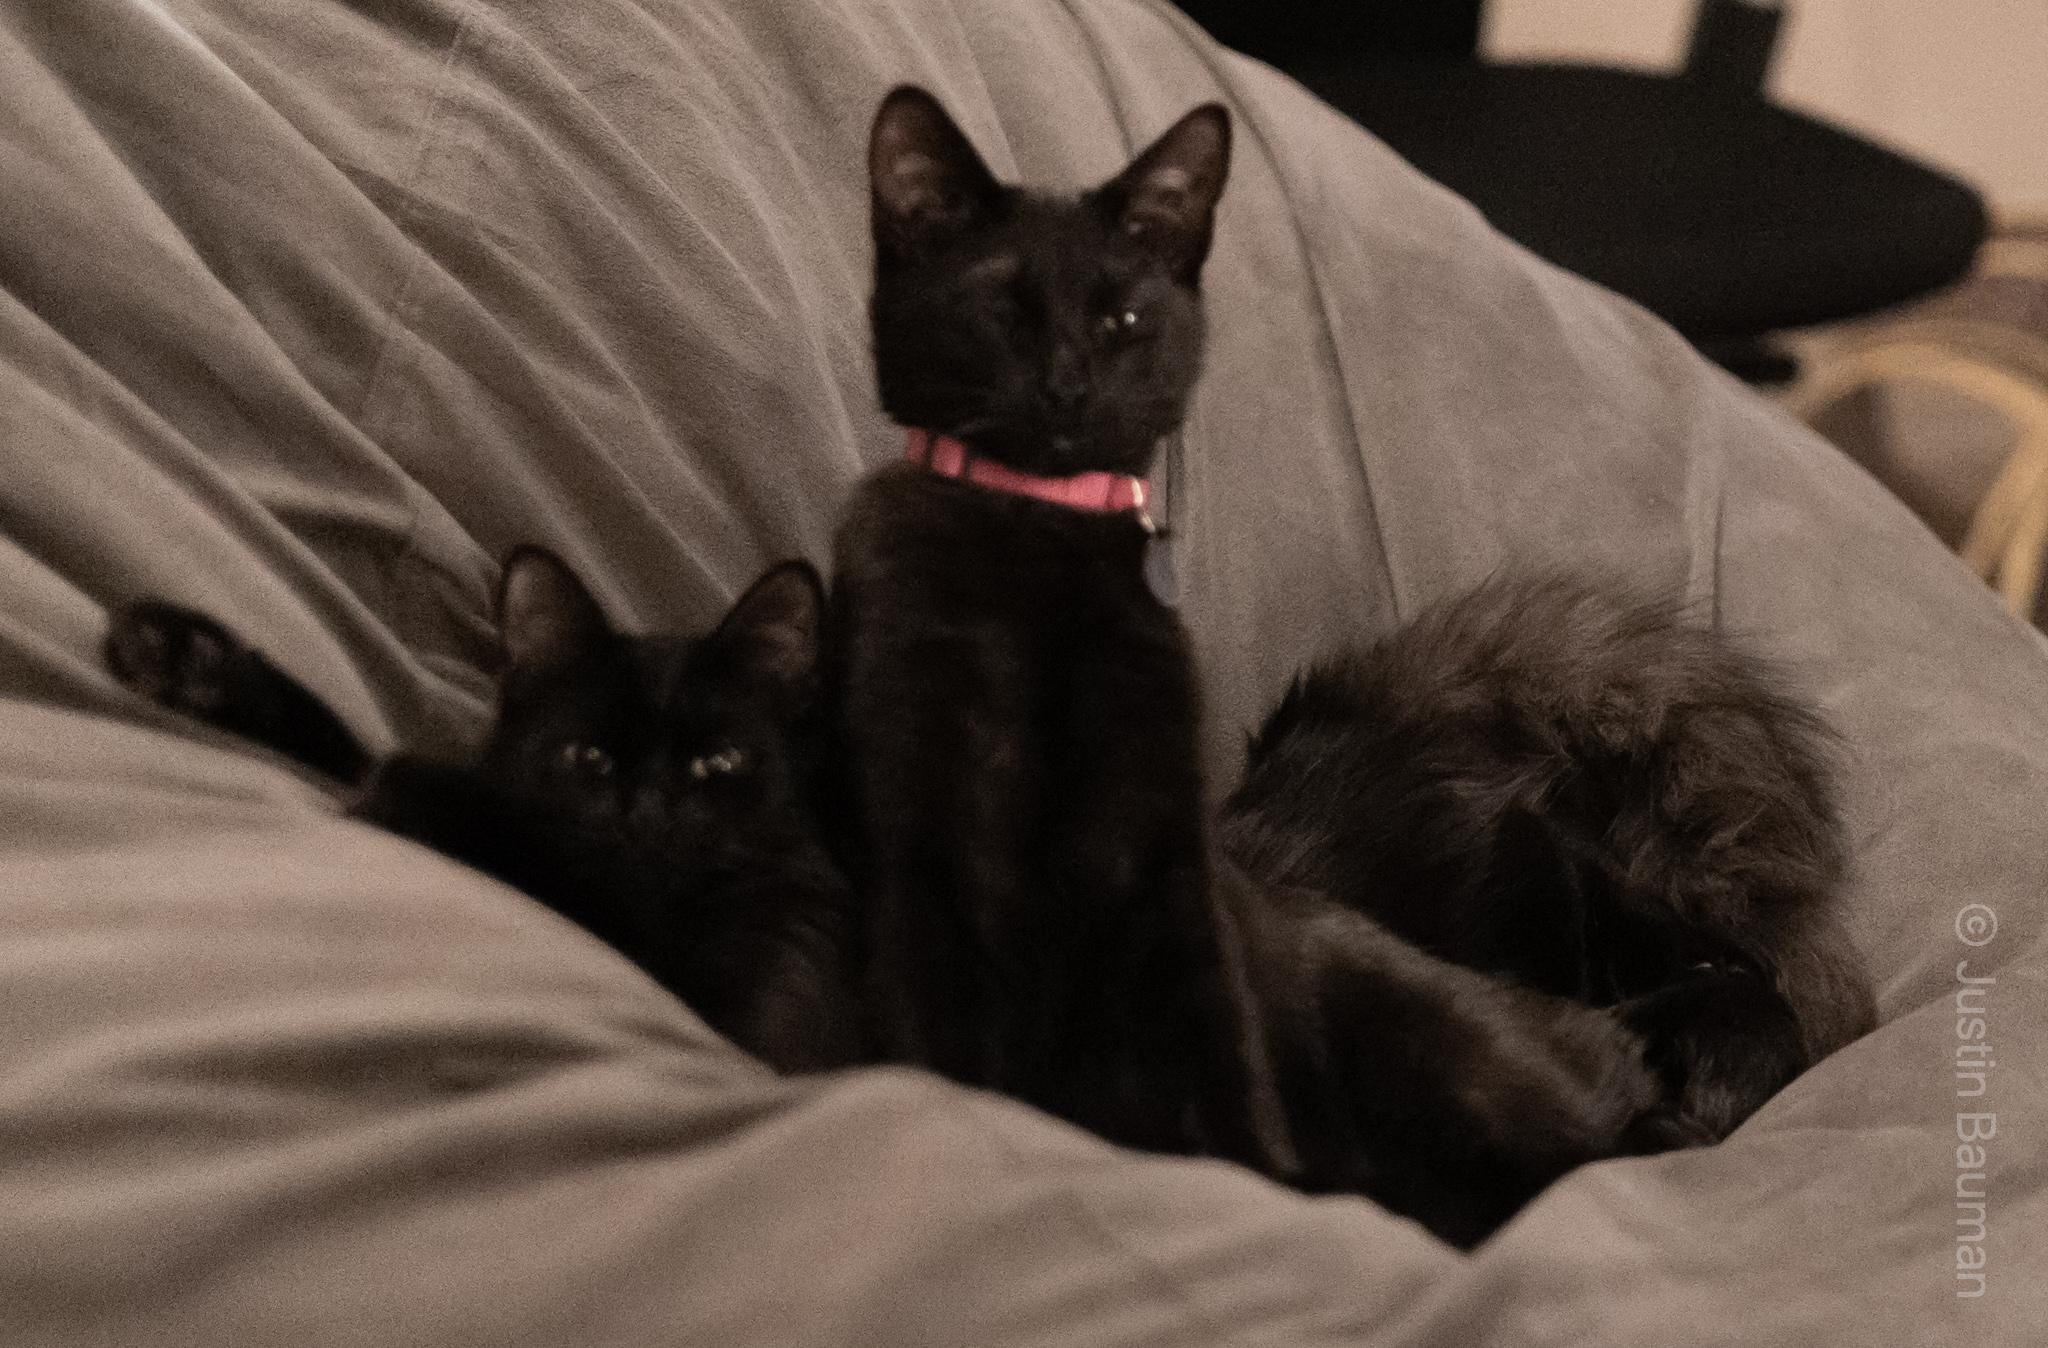 Luna winking, and Lilith is comfortable